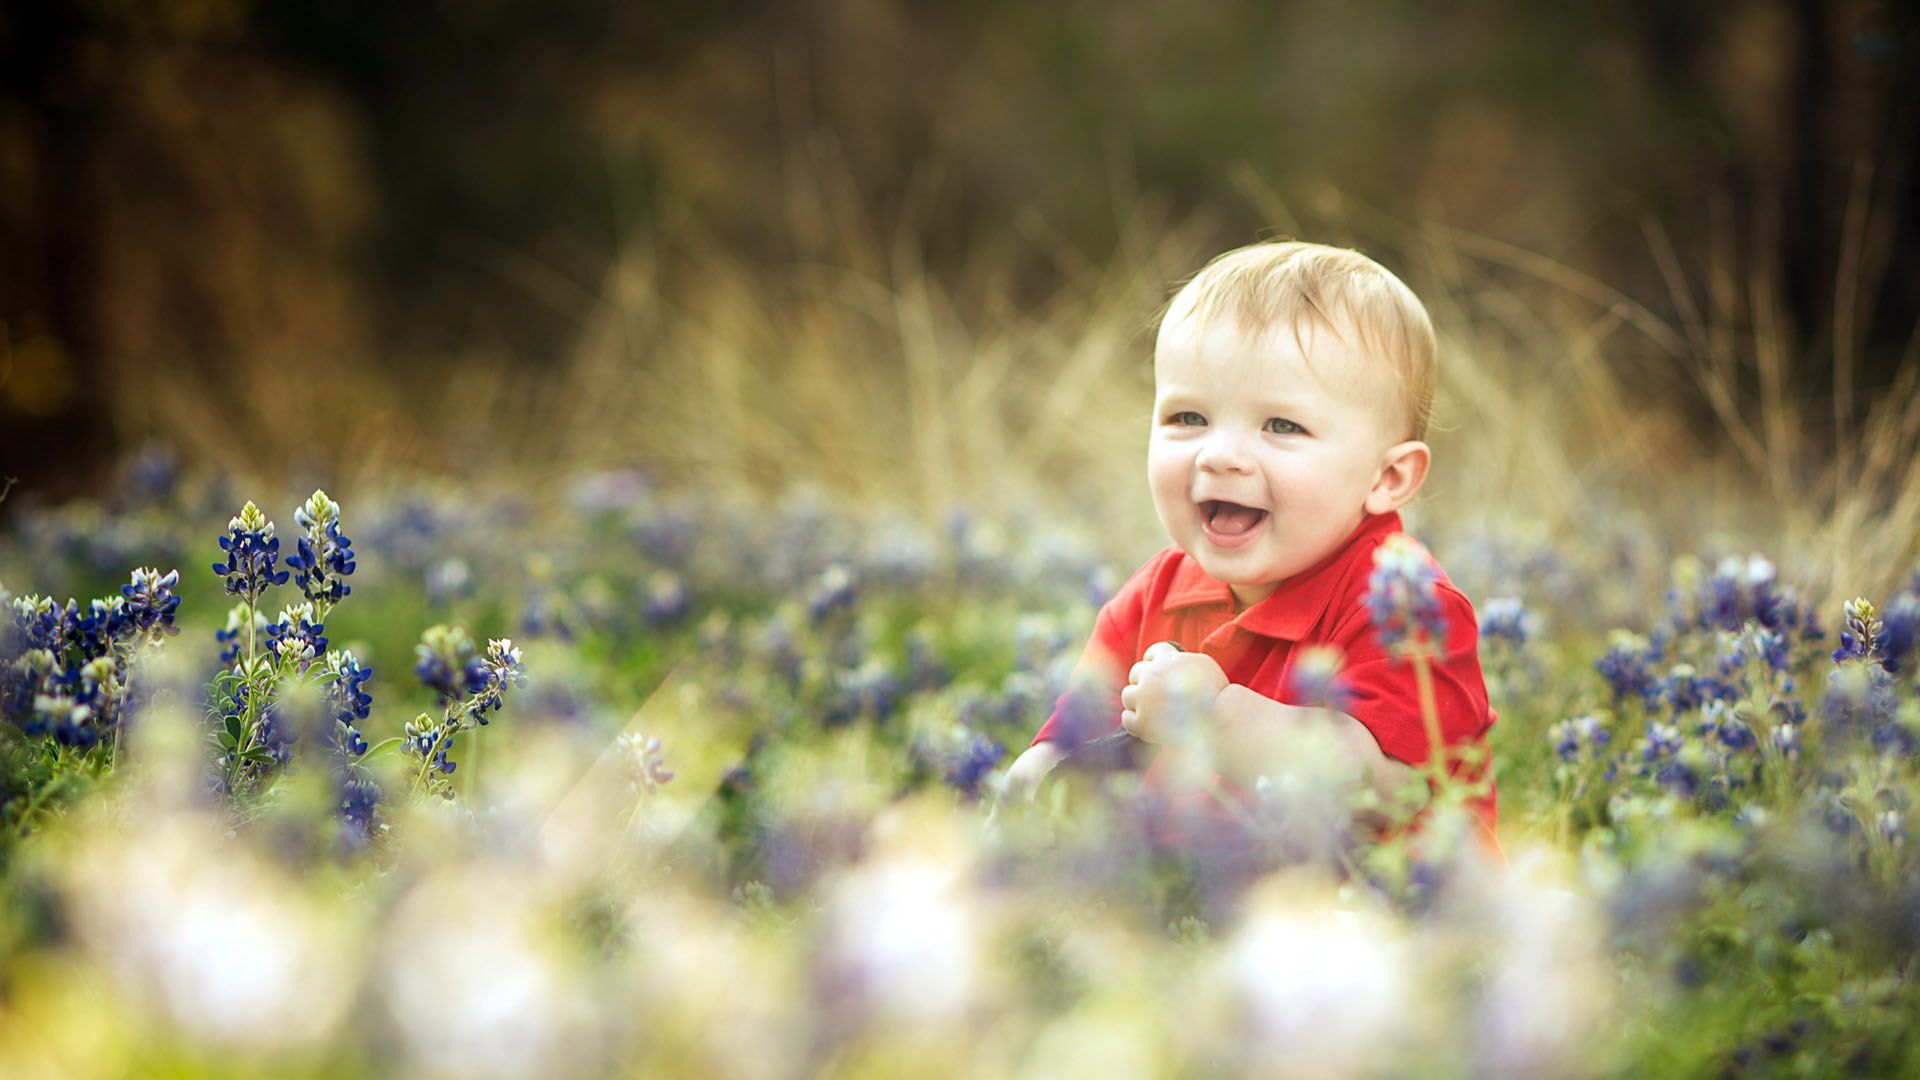 Download Happy Baby HD Wallpaper. Cute baby wallpaper, Baby boy clothes hipster, Cute baby smile